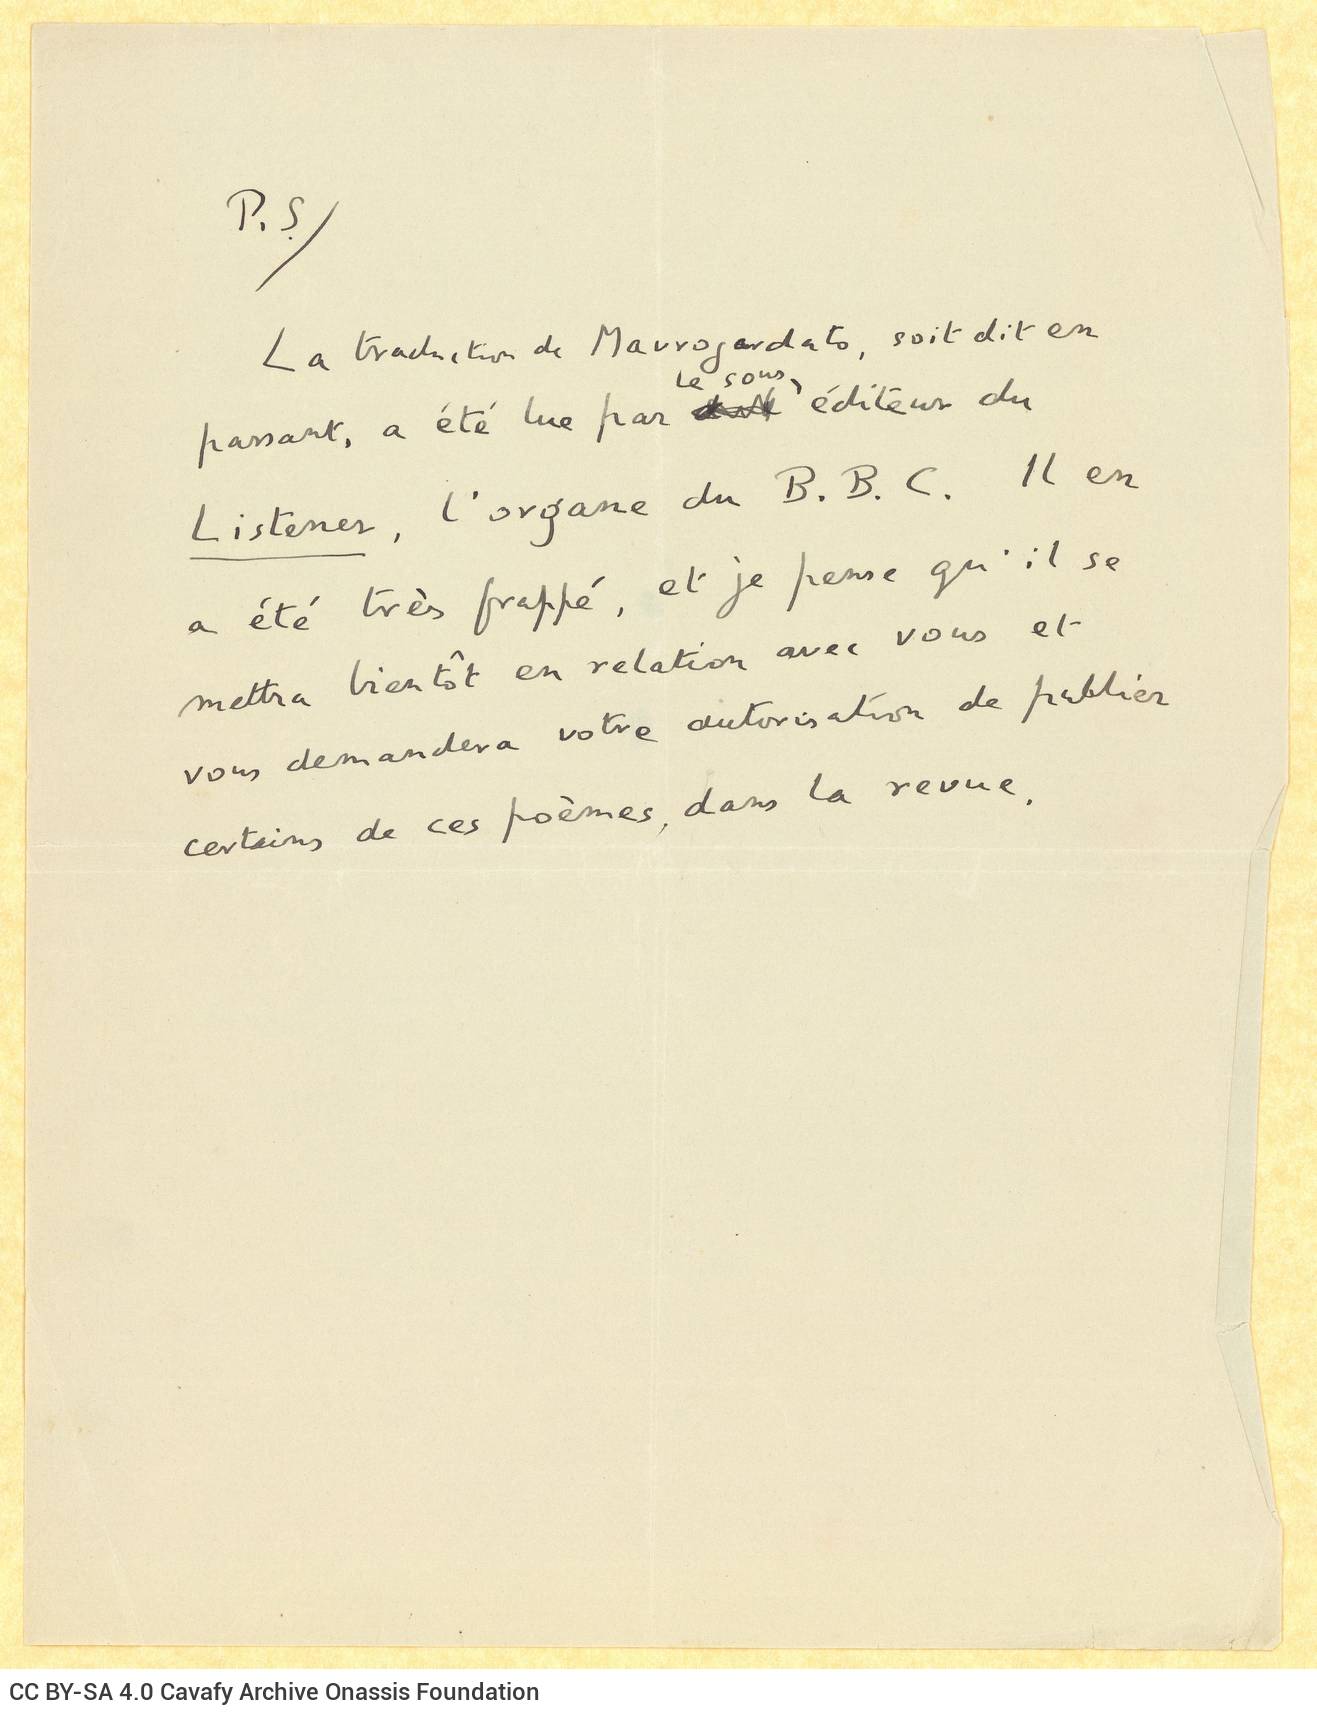 Typewritten letter by E. M. Forster to Rica Singopoulo on one side of a sheet, the verso of which is blank. Handwritten posts